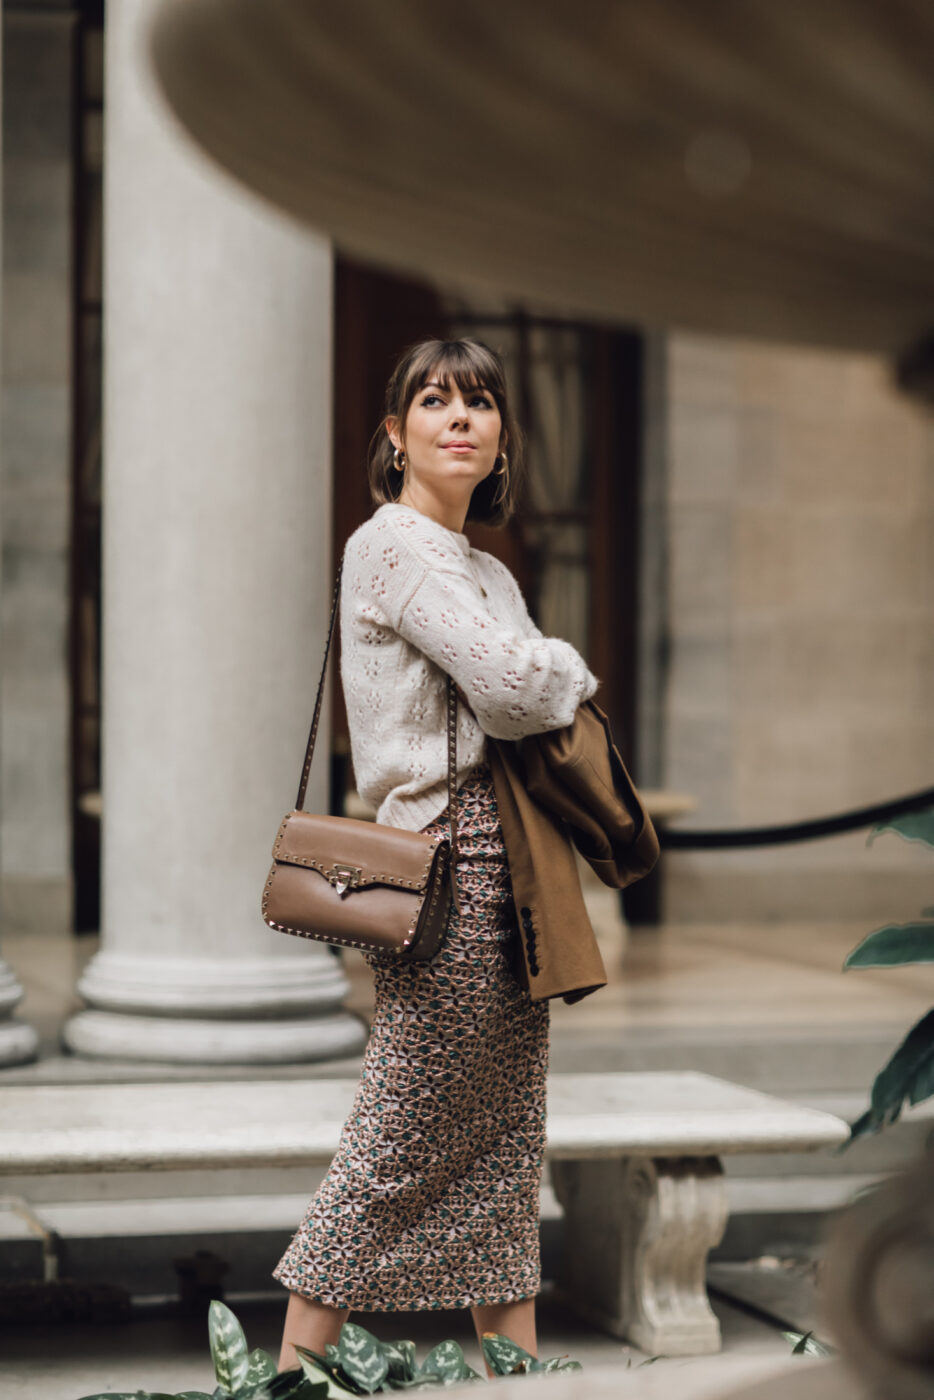 The Updated Way to Style a Pencil Skirt - Jenny Cipoletti